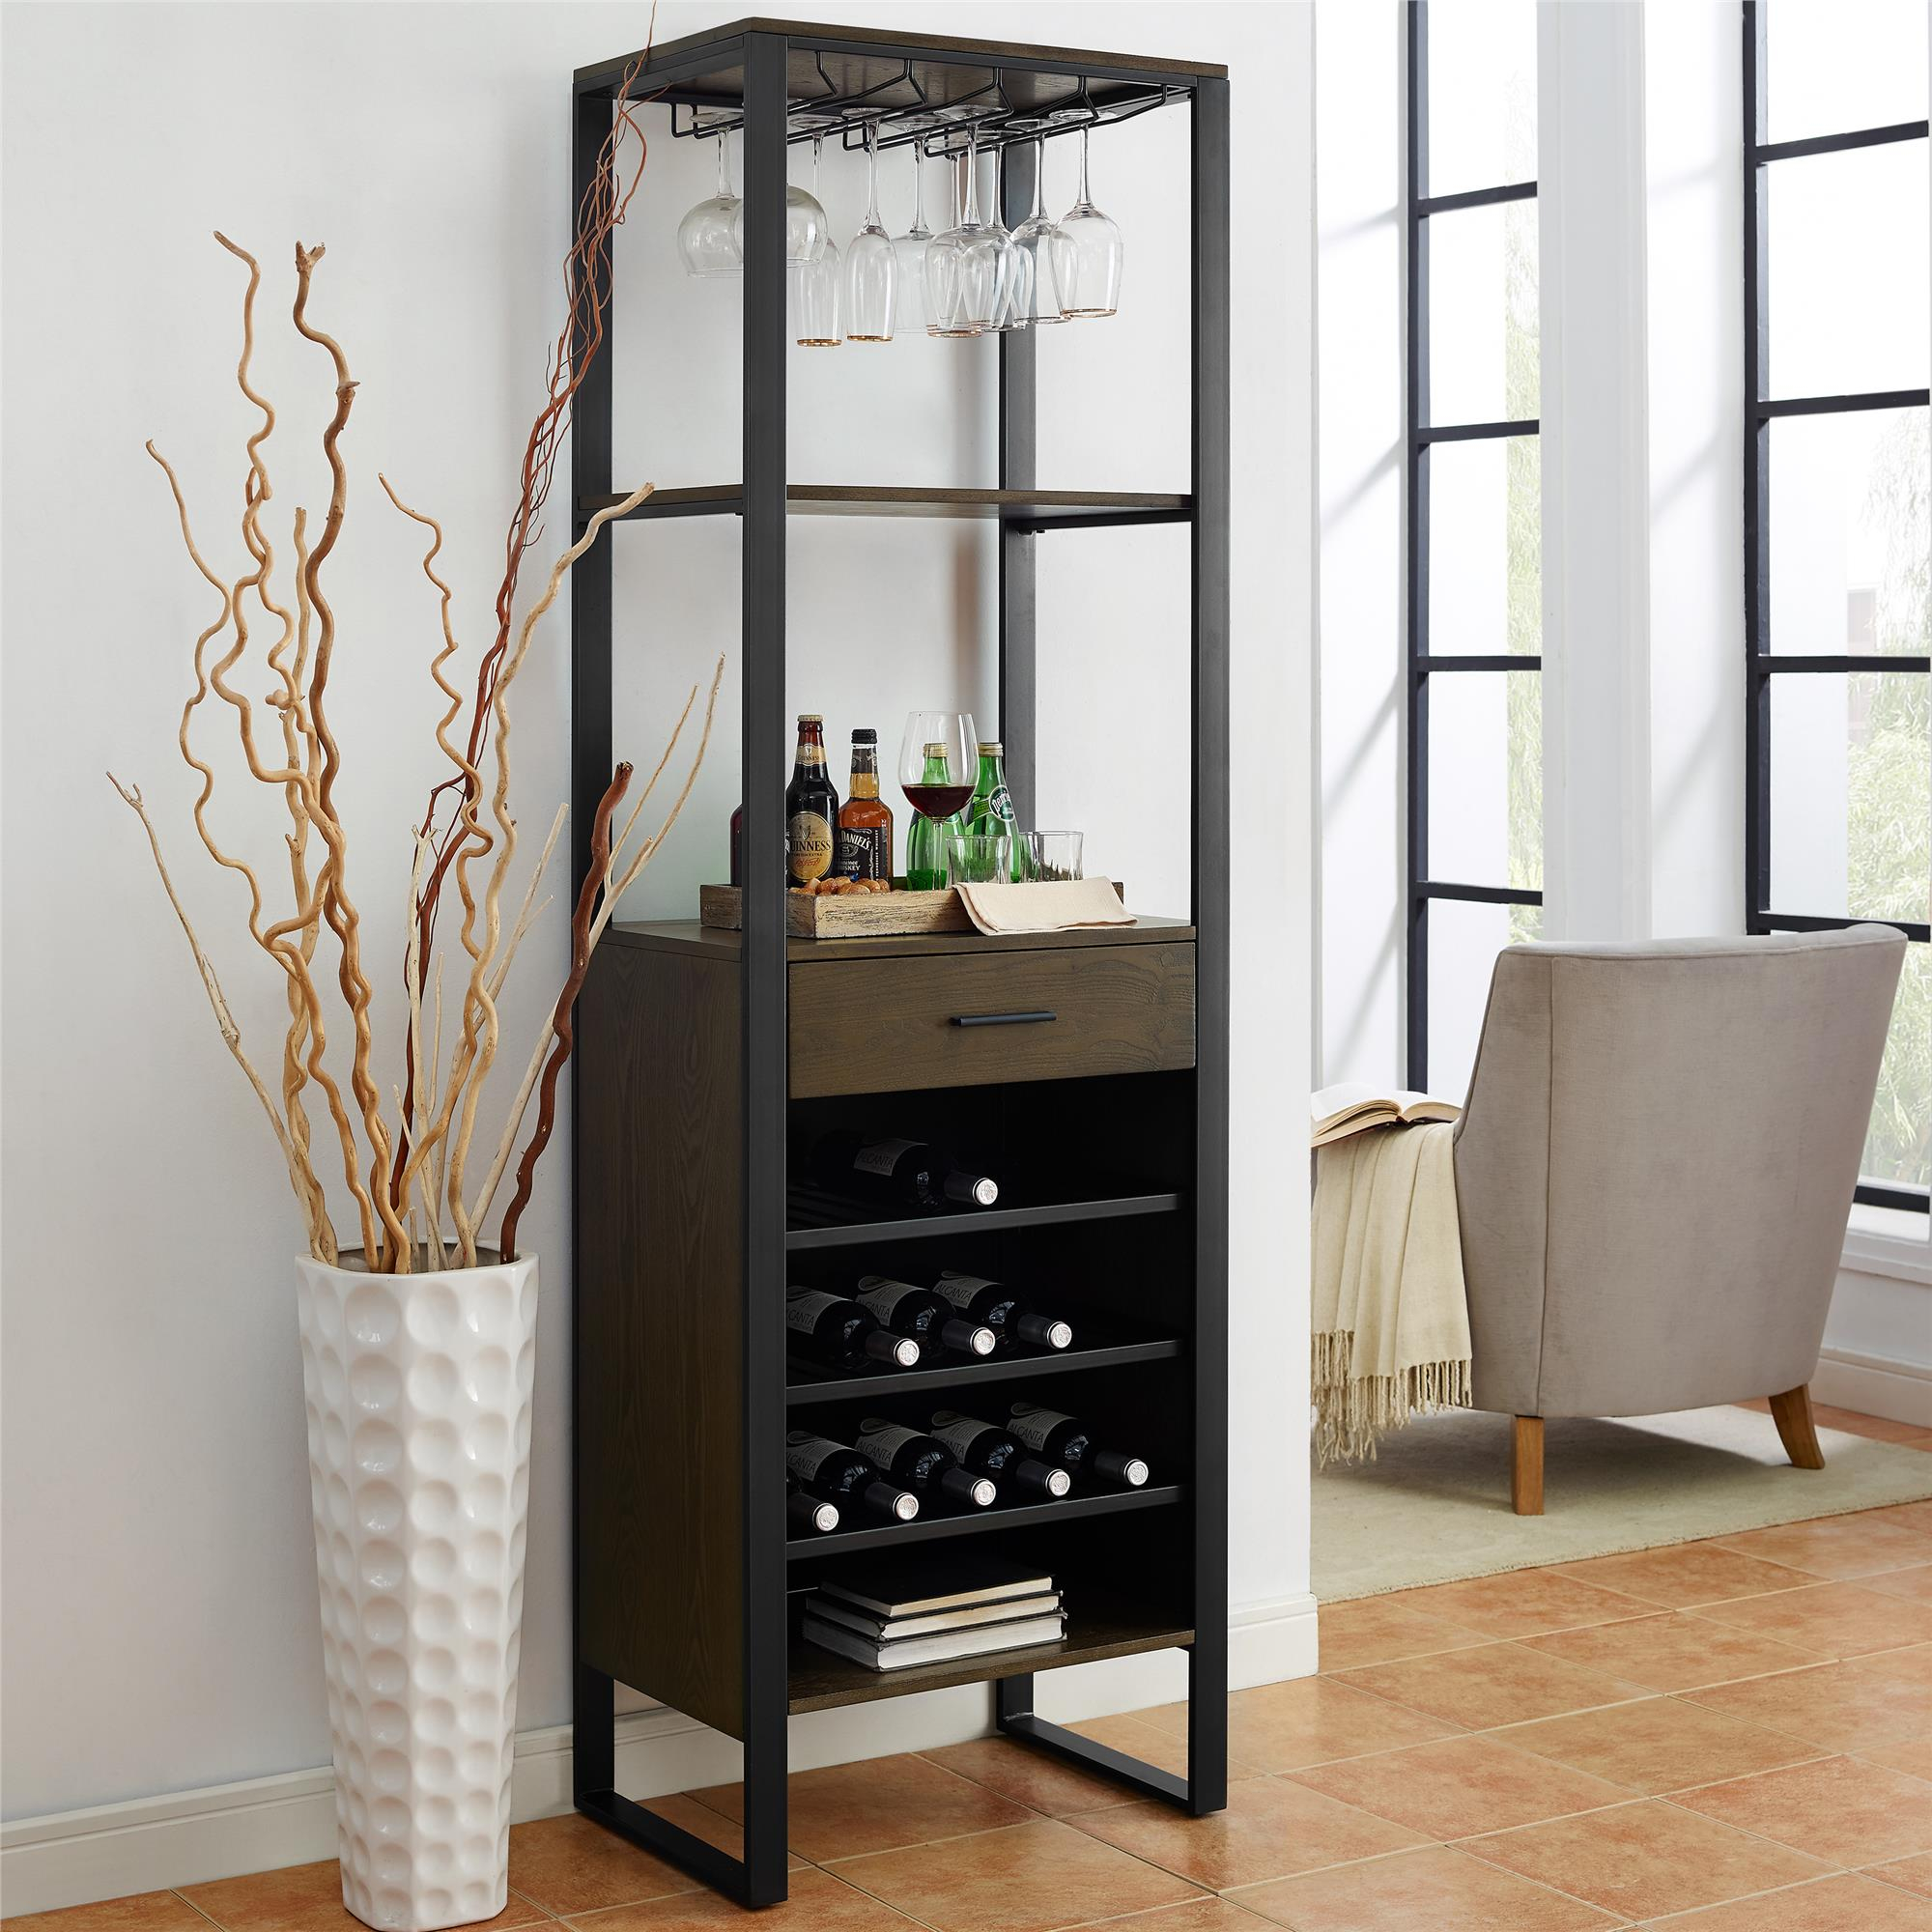 Dorel Living Soto Bar Cabinet With Wine Storage Ash Veneer With Gunmetal Finish intended for size 2000 X 2000